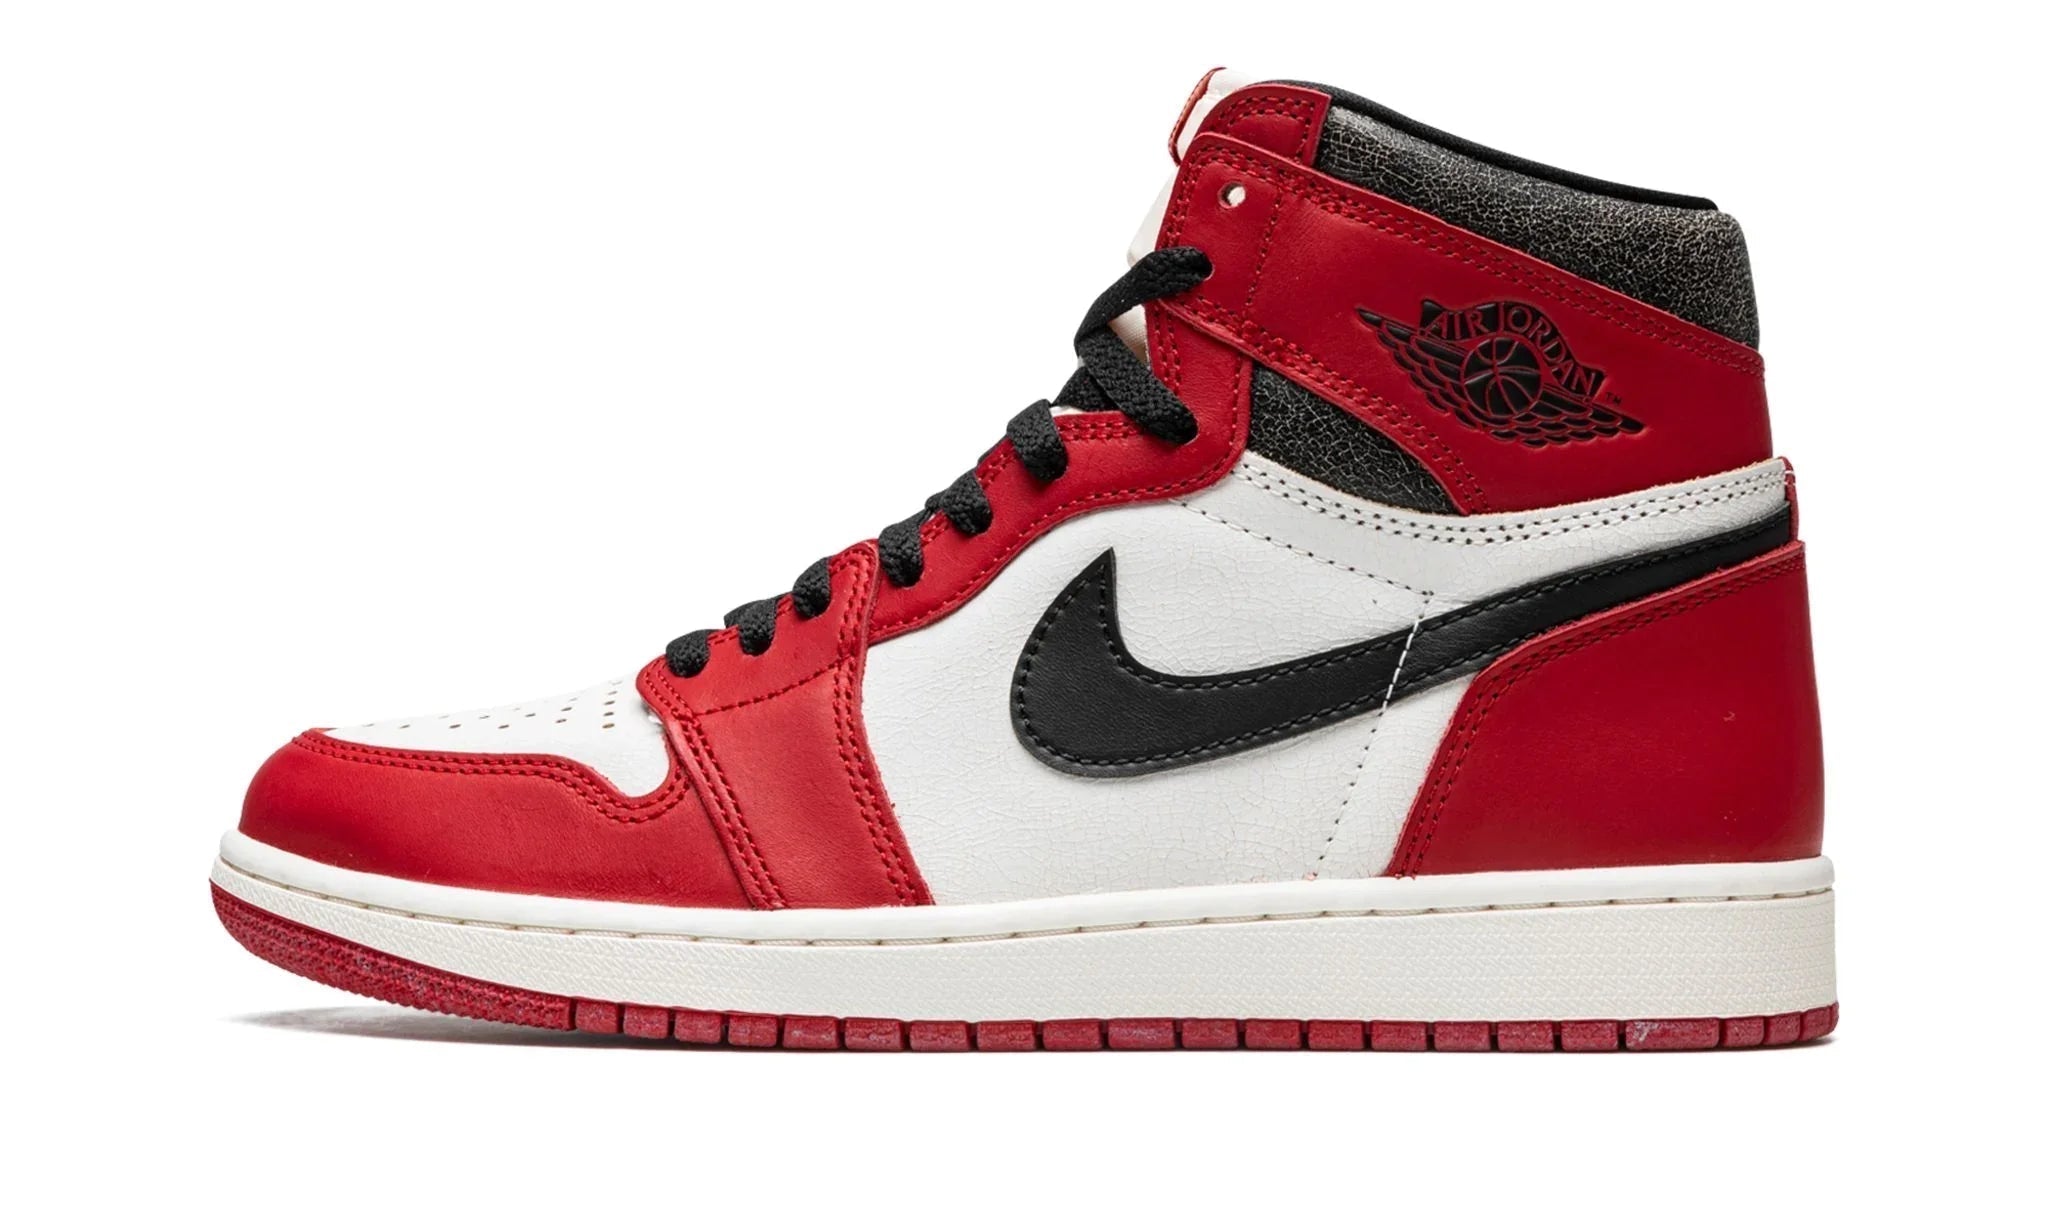 Jordan 1 High "Lost and Found" - DZ5485-612 - Sneakers